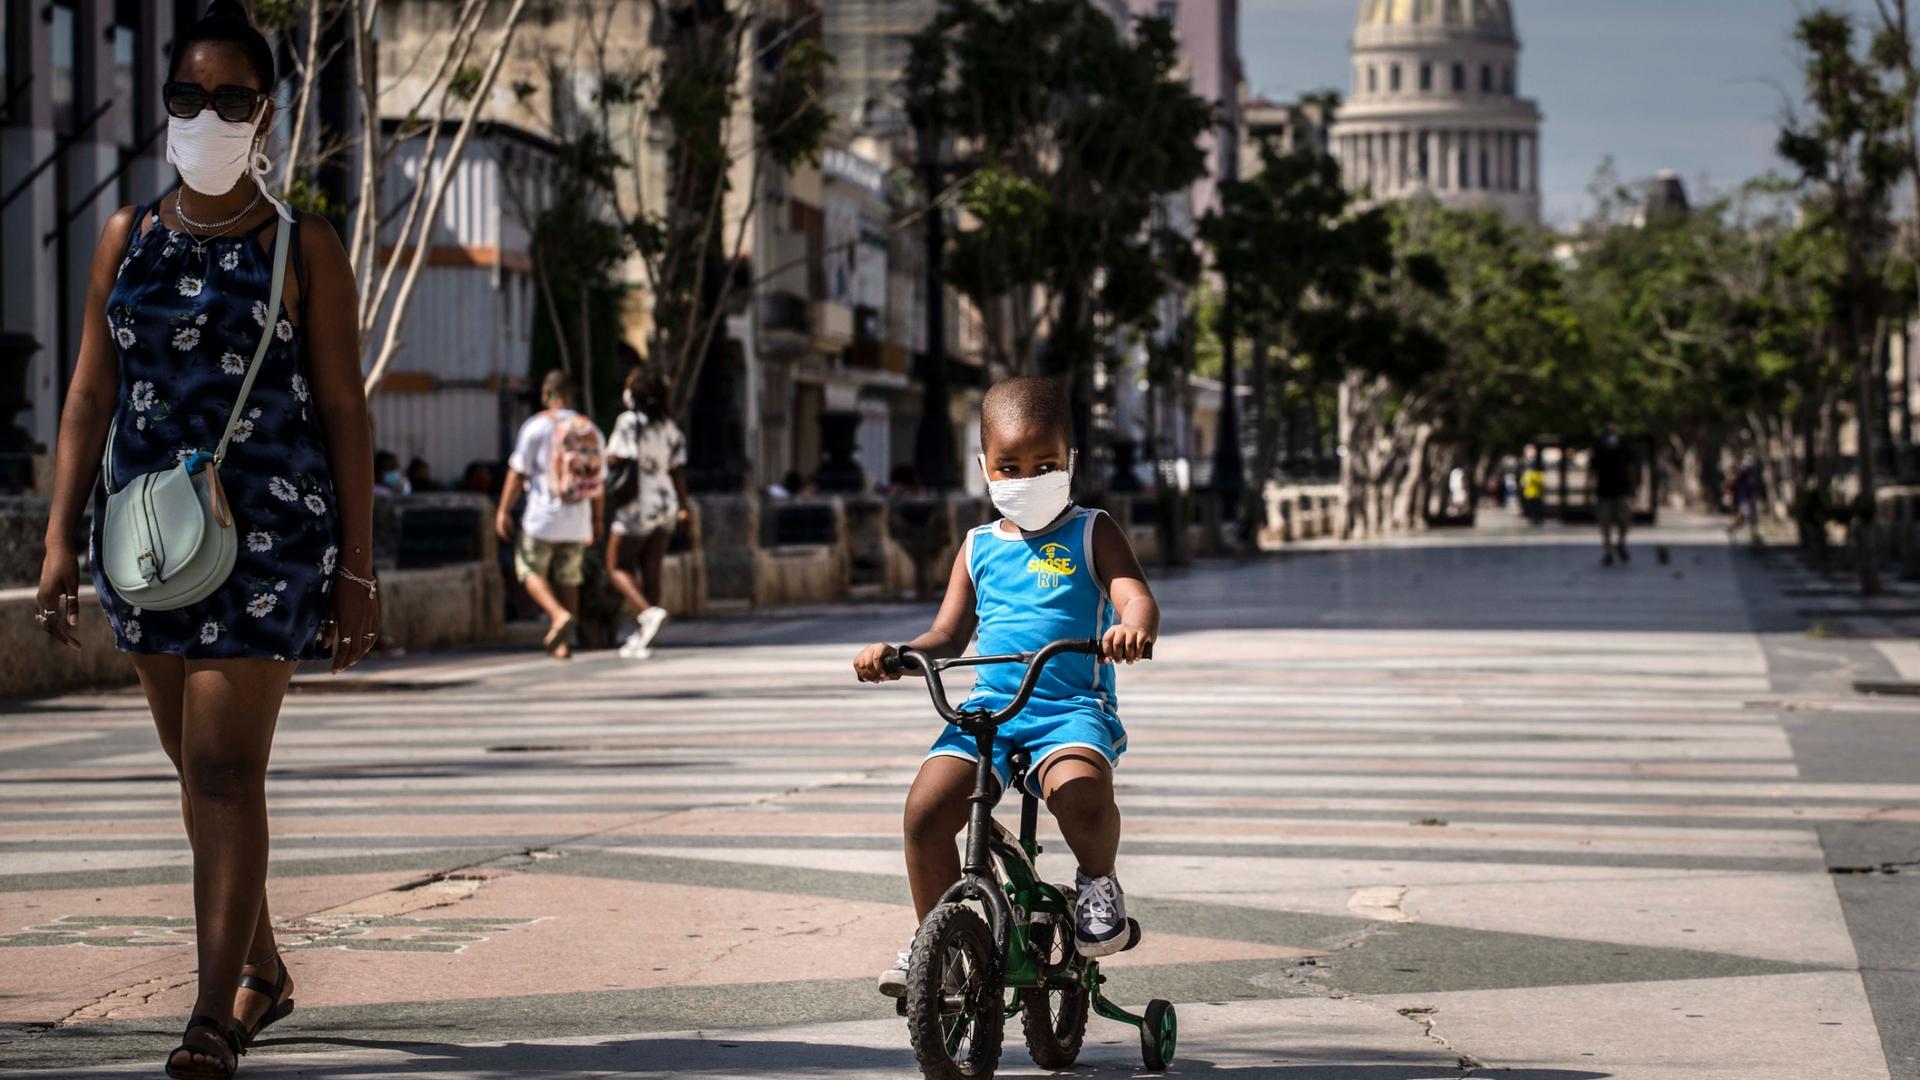 A young child is shown wearing a face mask and a blue outfit and riding a small bicycle with training wheels.